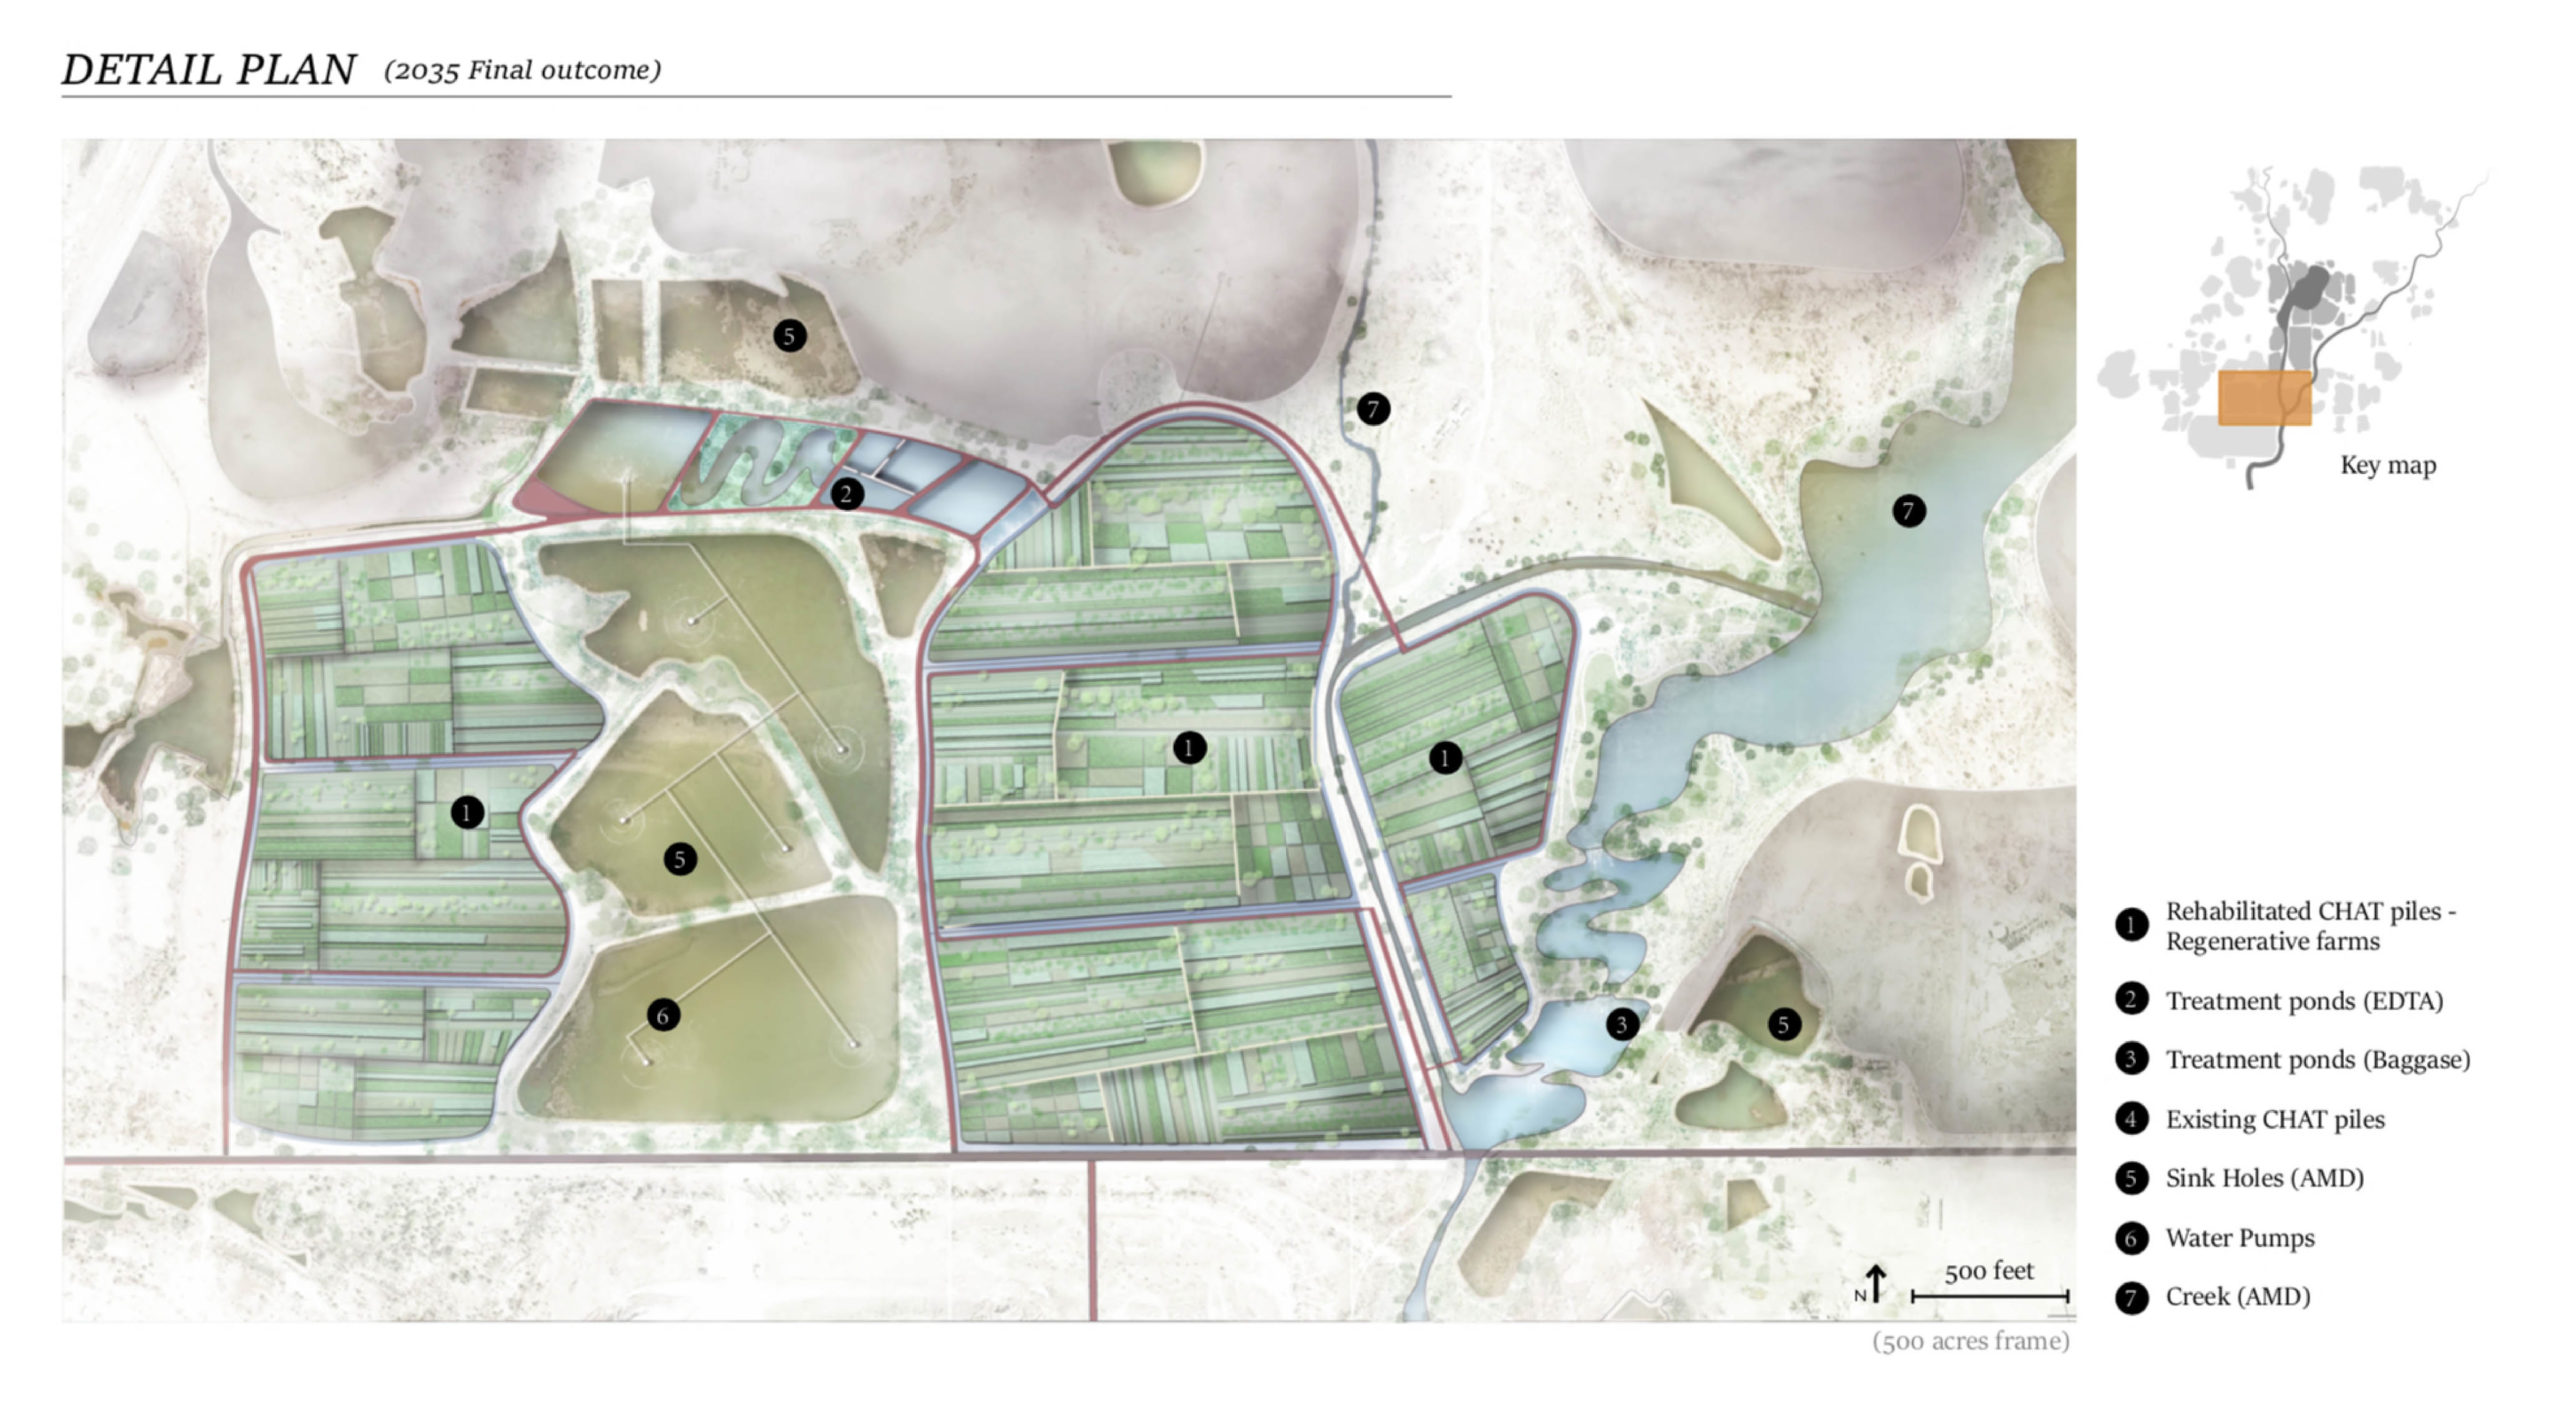 Site Plan of Tar Creek after the proposal by Hao Holly Wang